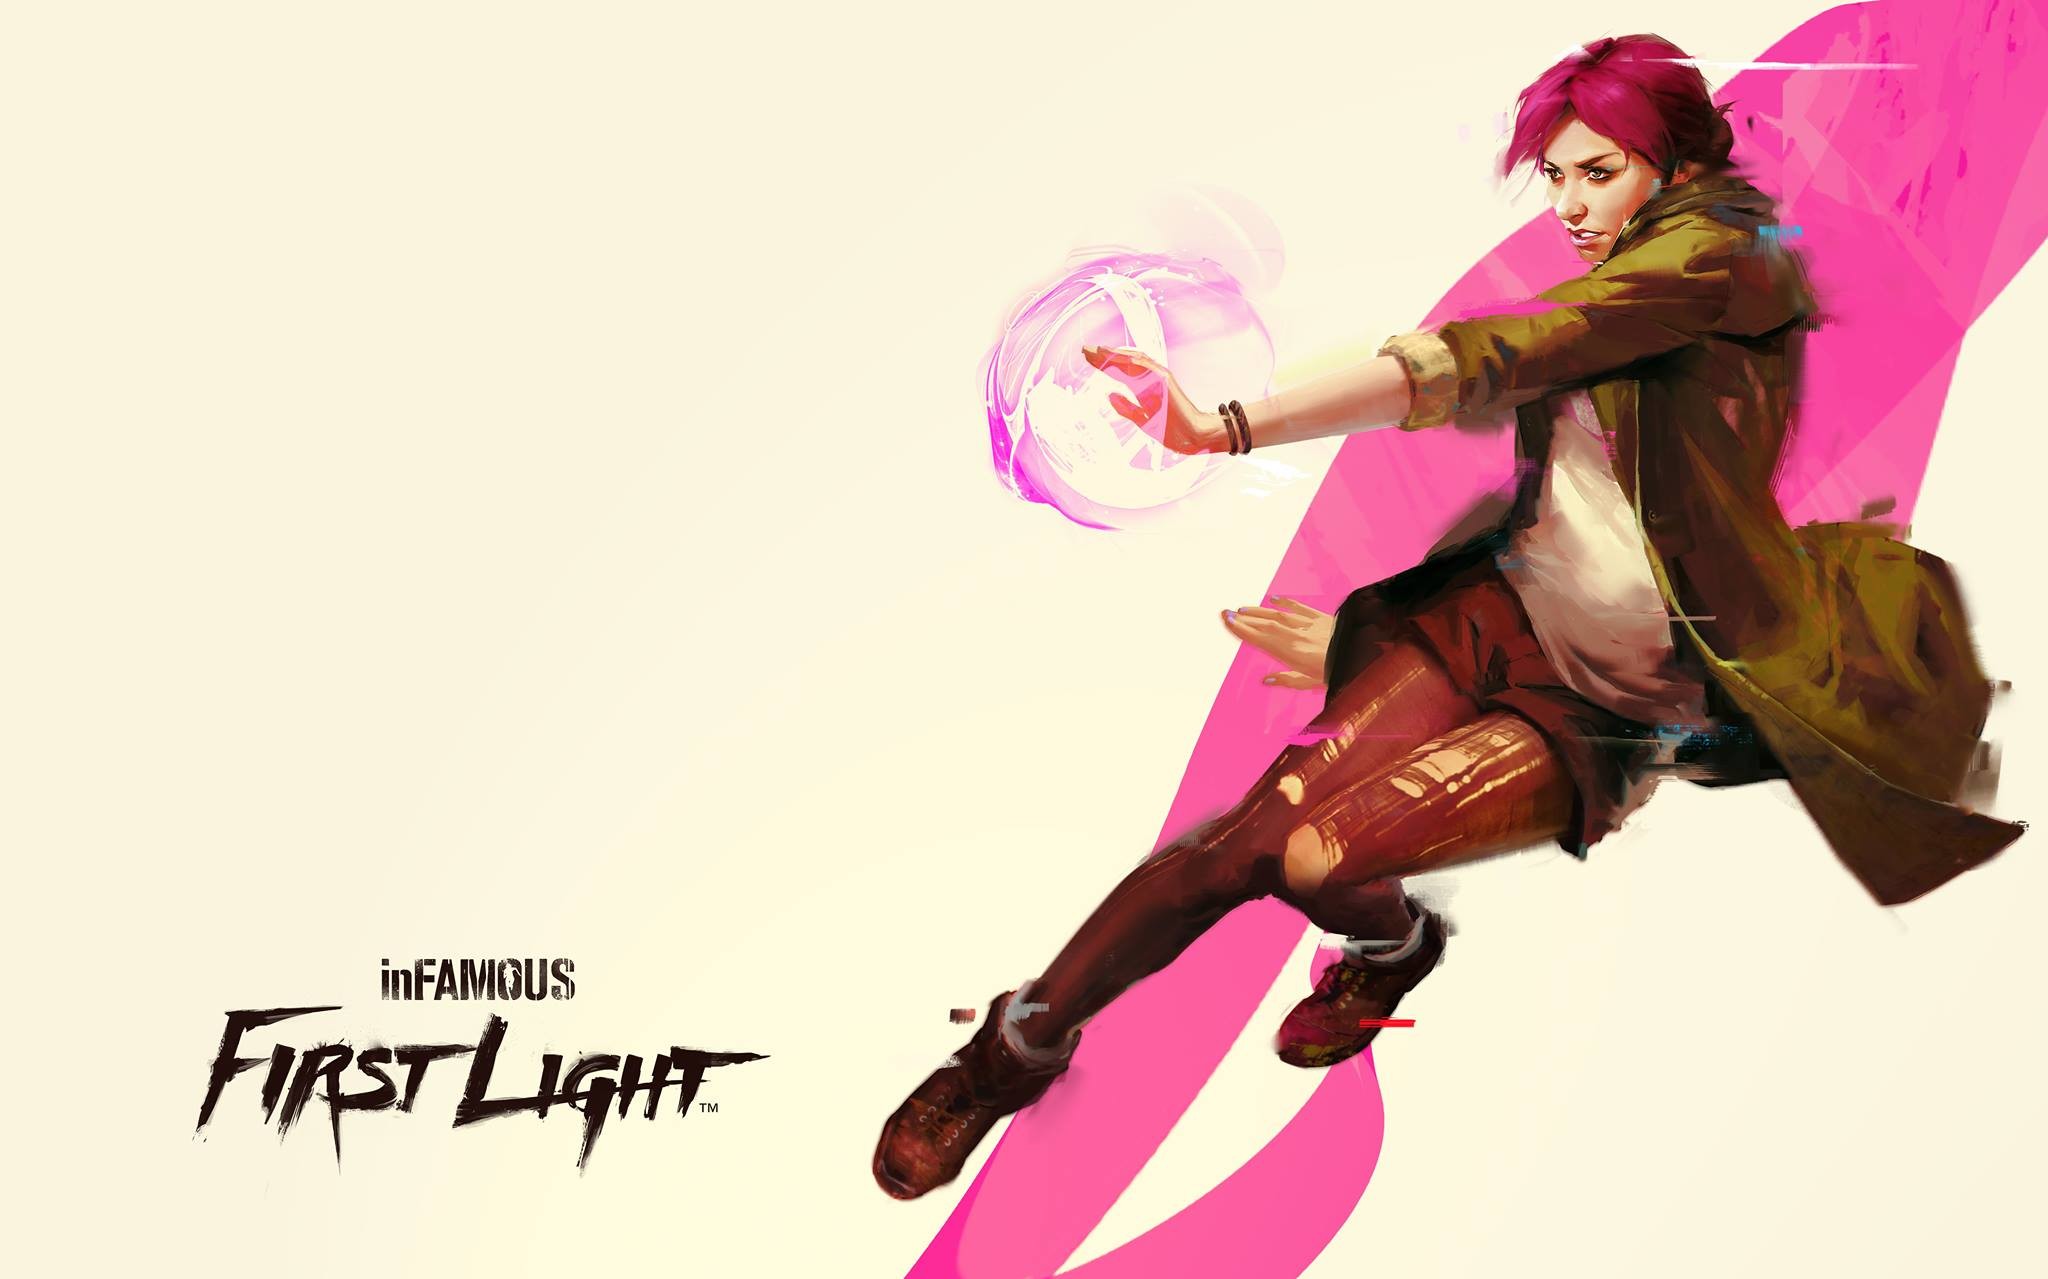 Fetch first. Infamous first Light арт. Проныра Уокер. Second son и first Light. Infamous first Light проныра арт.